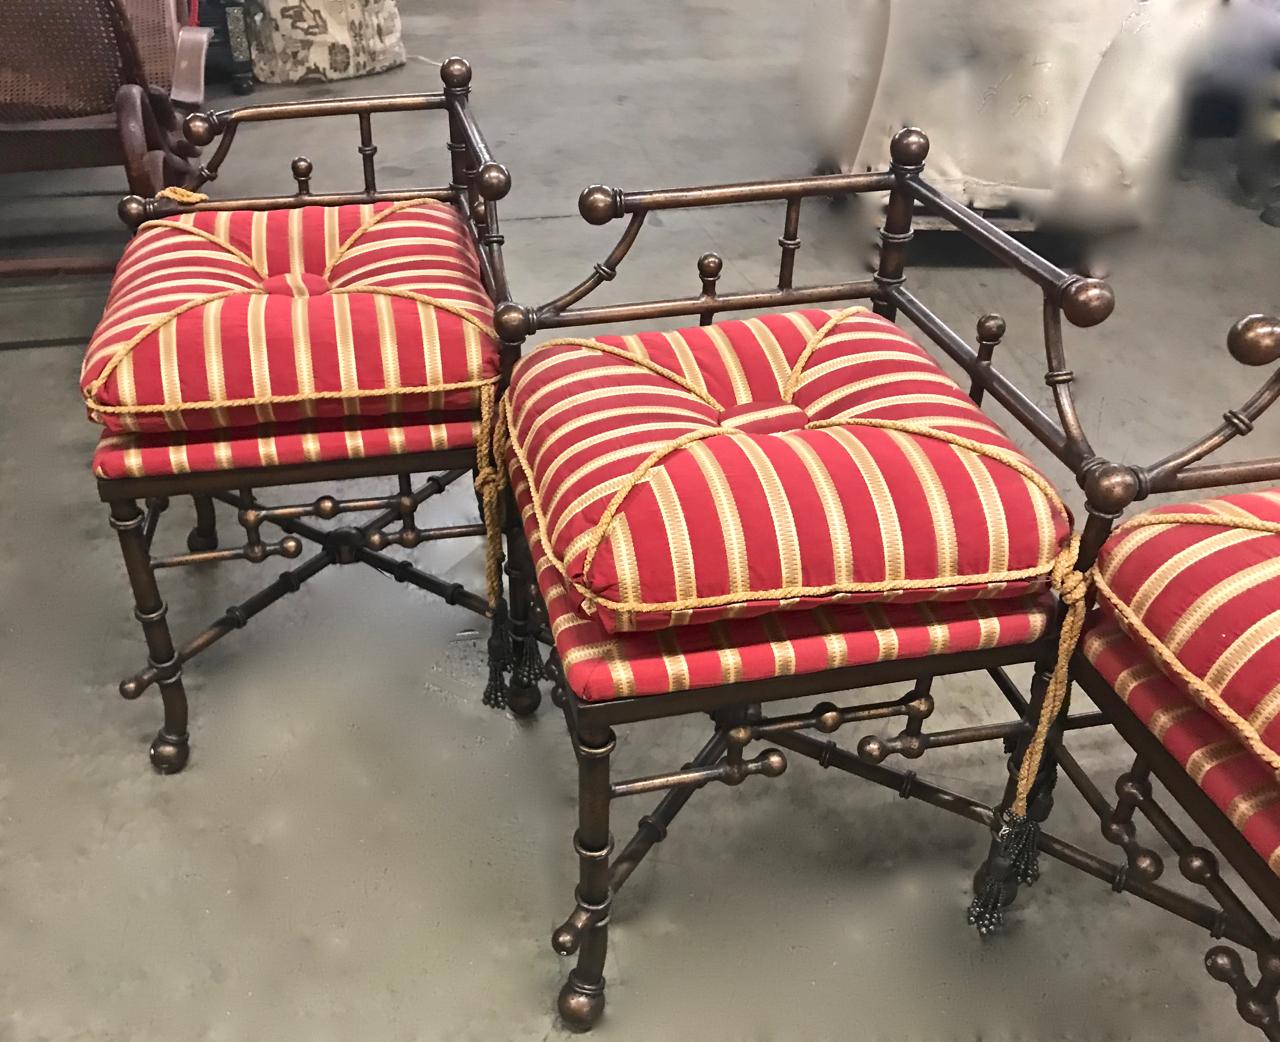 This is a unique 20th century triple seat brass faux bamboo bench that has been beautifully upholstered in a silk and tassels. Both the bench and upholstery are in excellent condition. This multipurpose bench could be placed at the foot of a bed, in